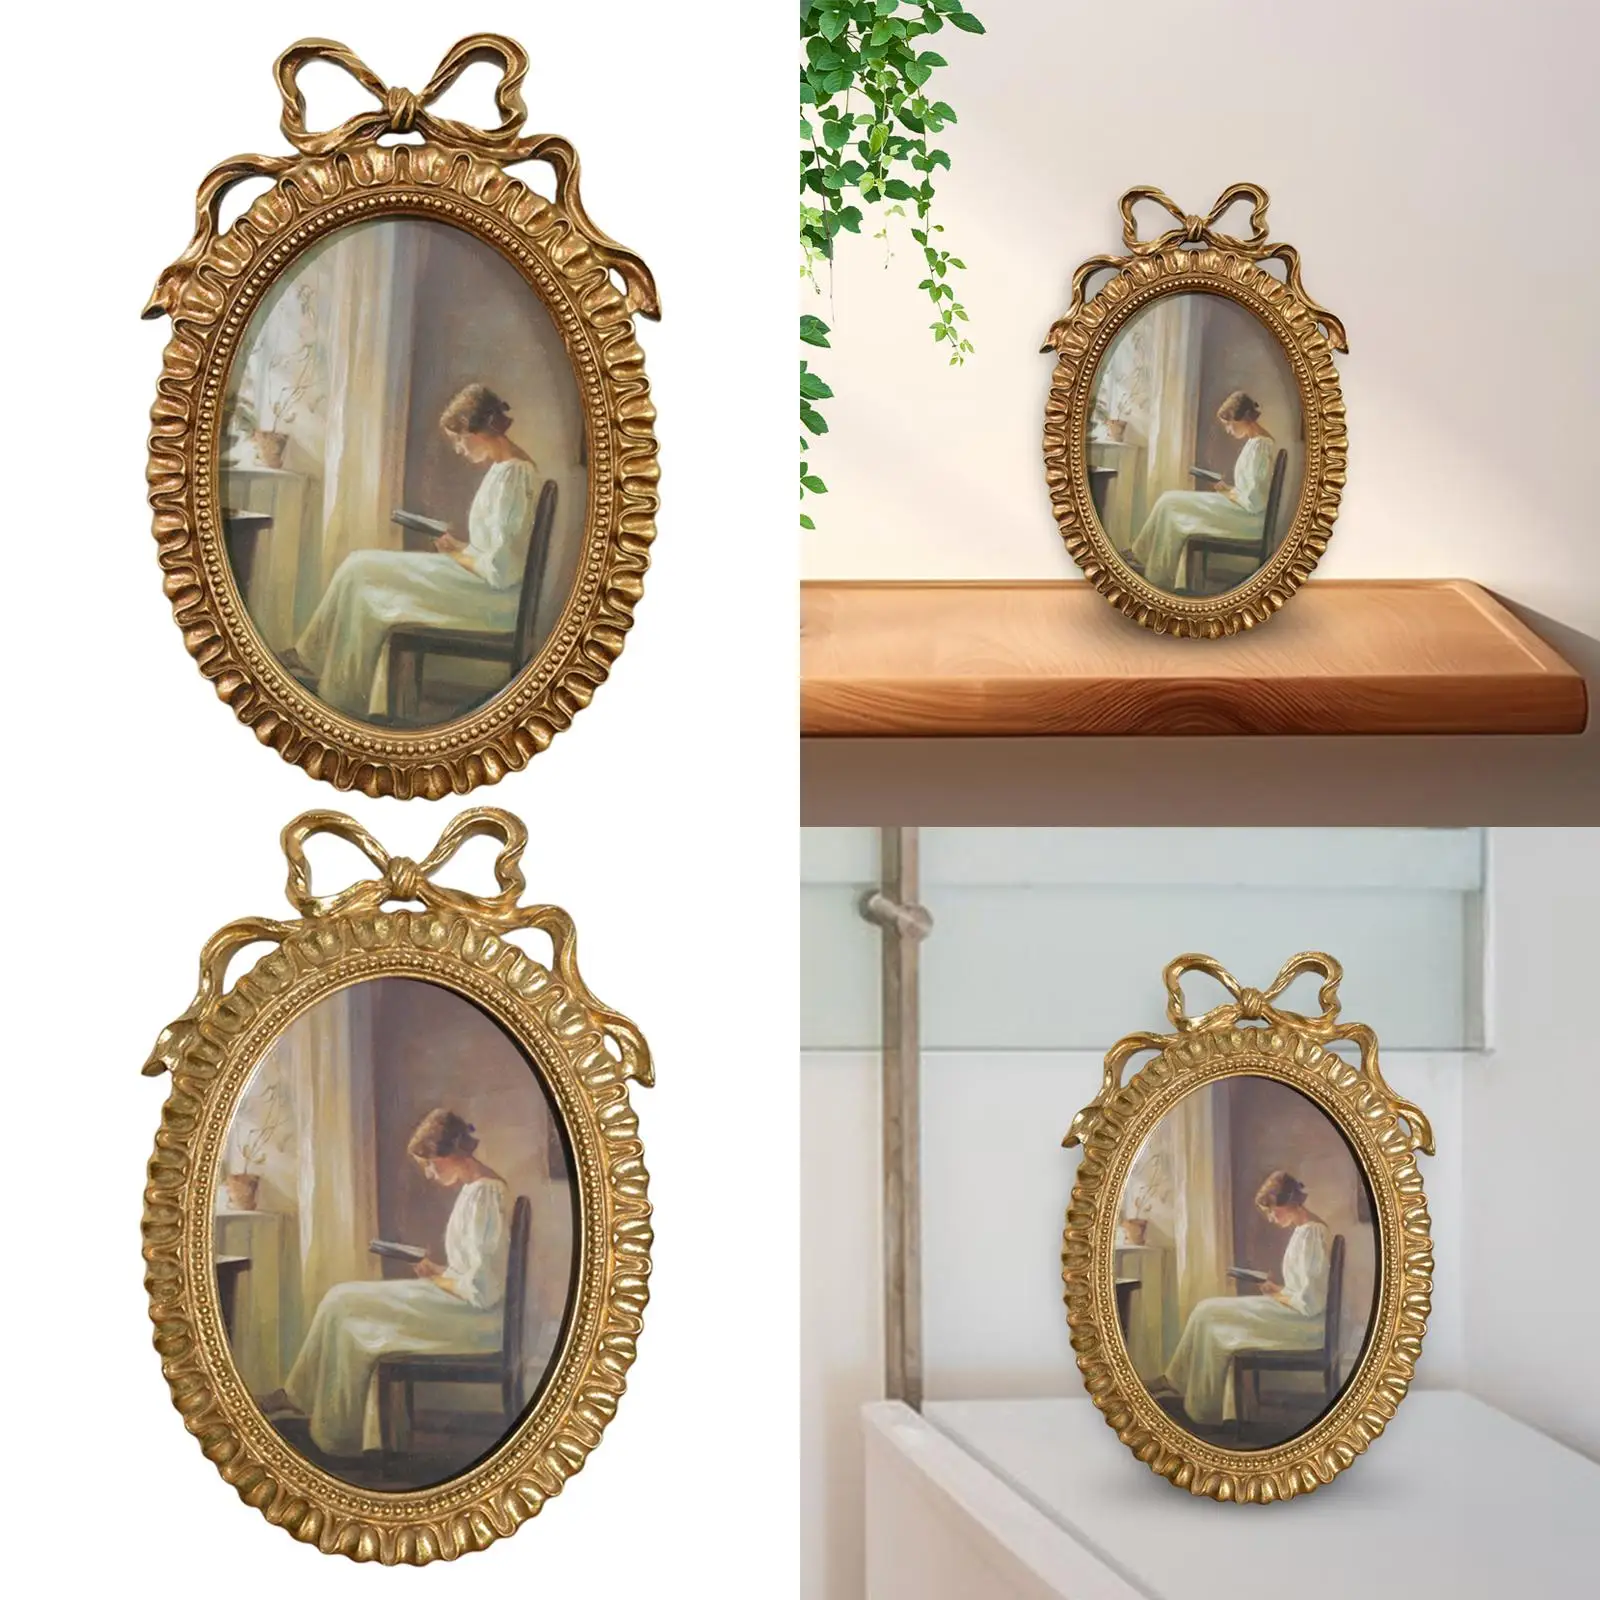 Resin Oval Picture Frame 25.5x17.5cm Tabletop Display and Wall Hanging Handmade Retro Styled for Office Studio Accessory Elegant